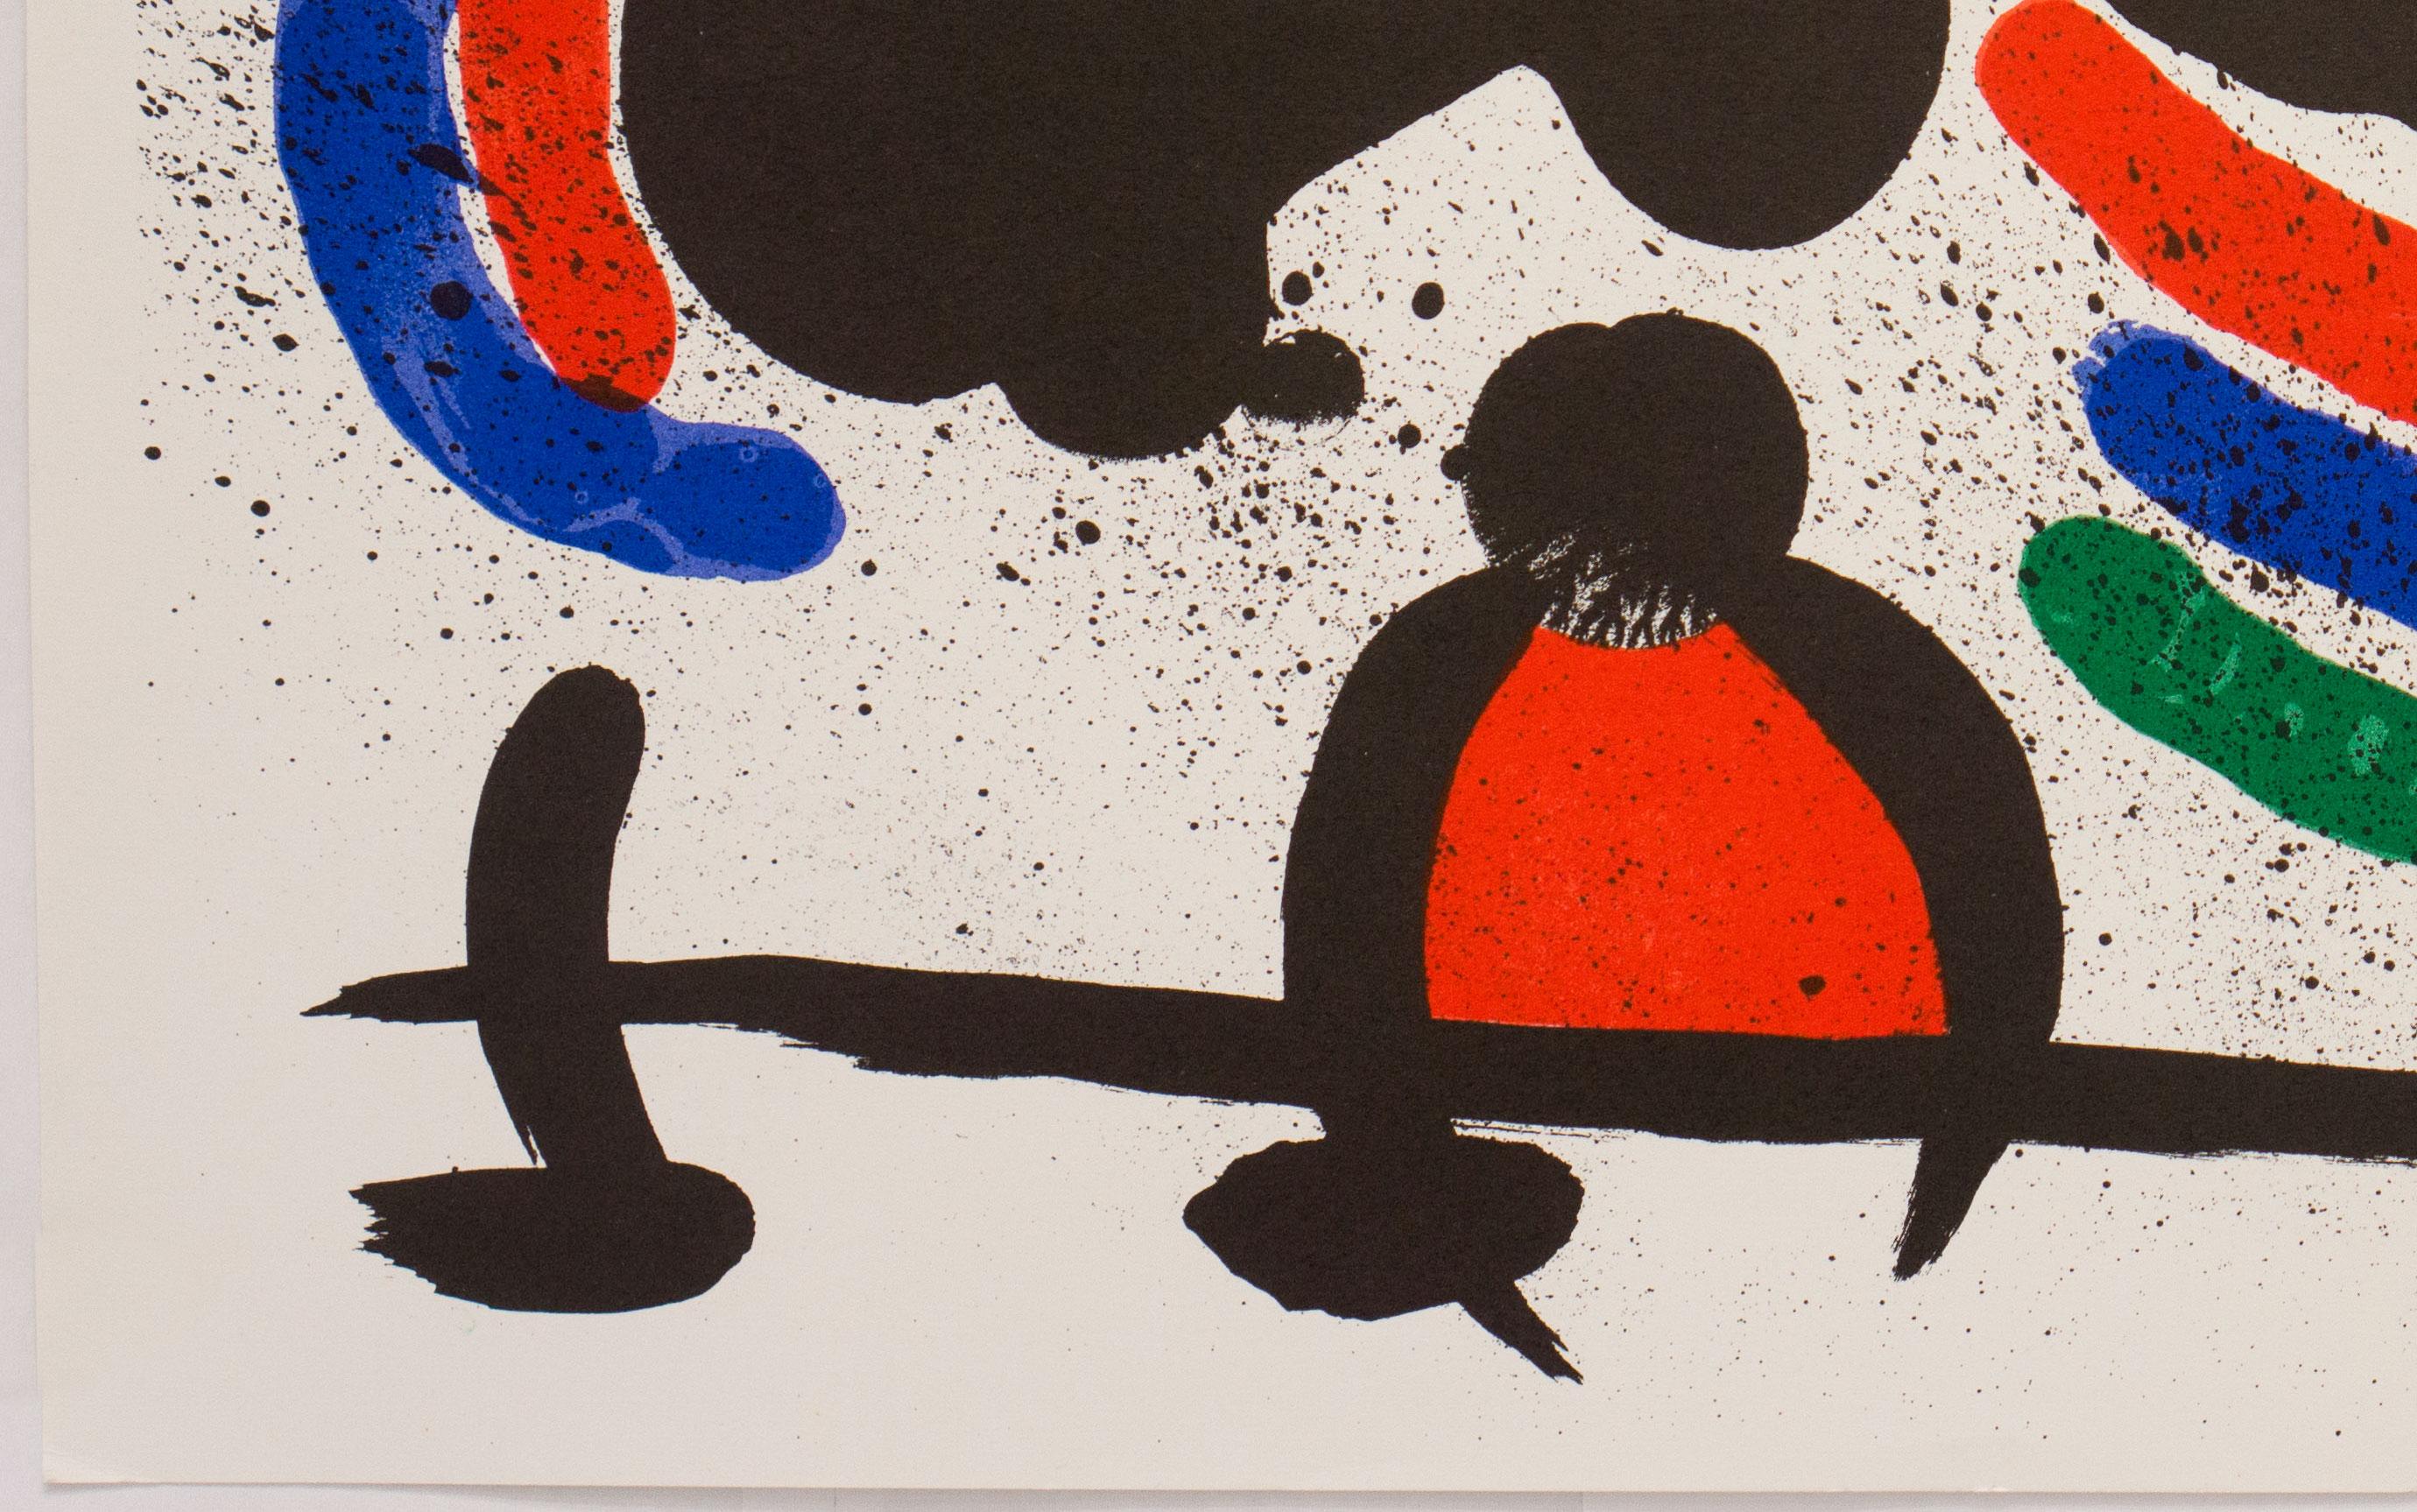 Plate signed 1972 lithograph, Original Lithograph IV, by Spanish artist Joan Miró(1893-1983). Printed by Atelier Mourlot and published in 1972 as one of a series of 14 lithographs created for the 